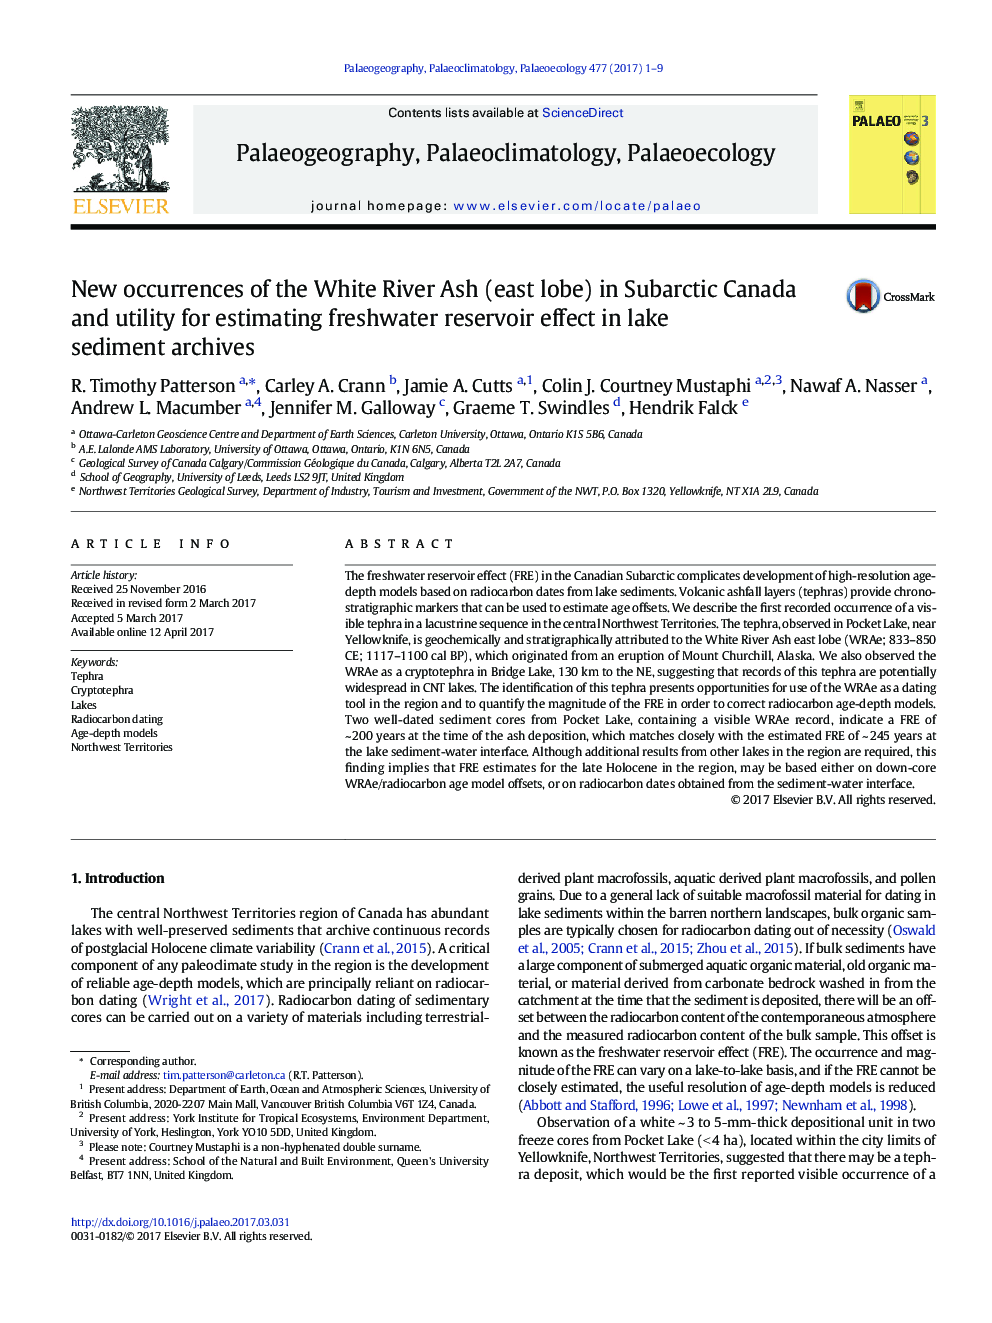 New occurrences of the White River Ash (east lobe) in Subarctic Canada and utility for estimating freshwater reservoir effect in lake sediment archives